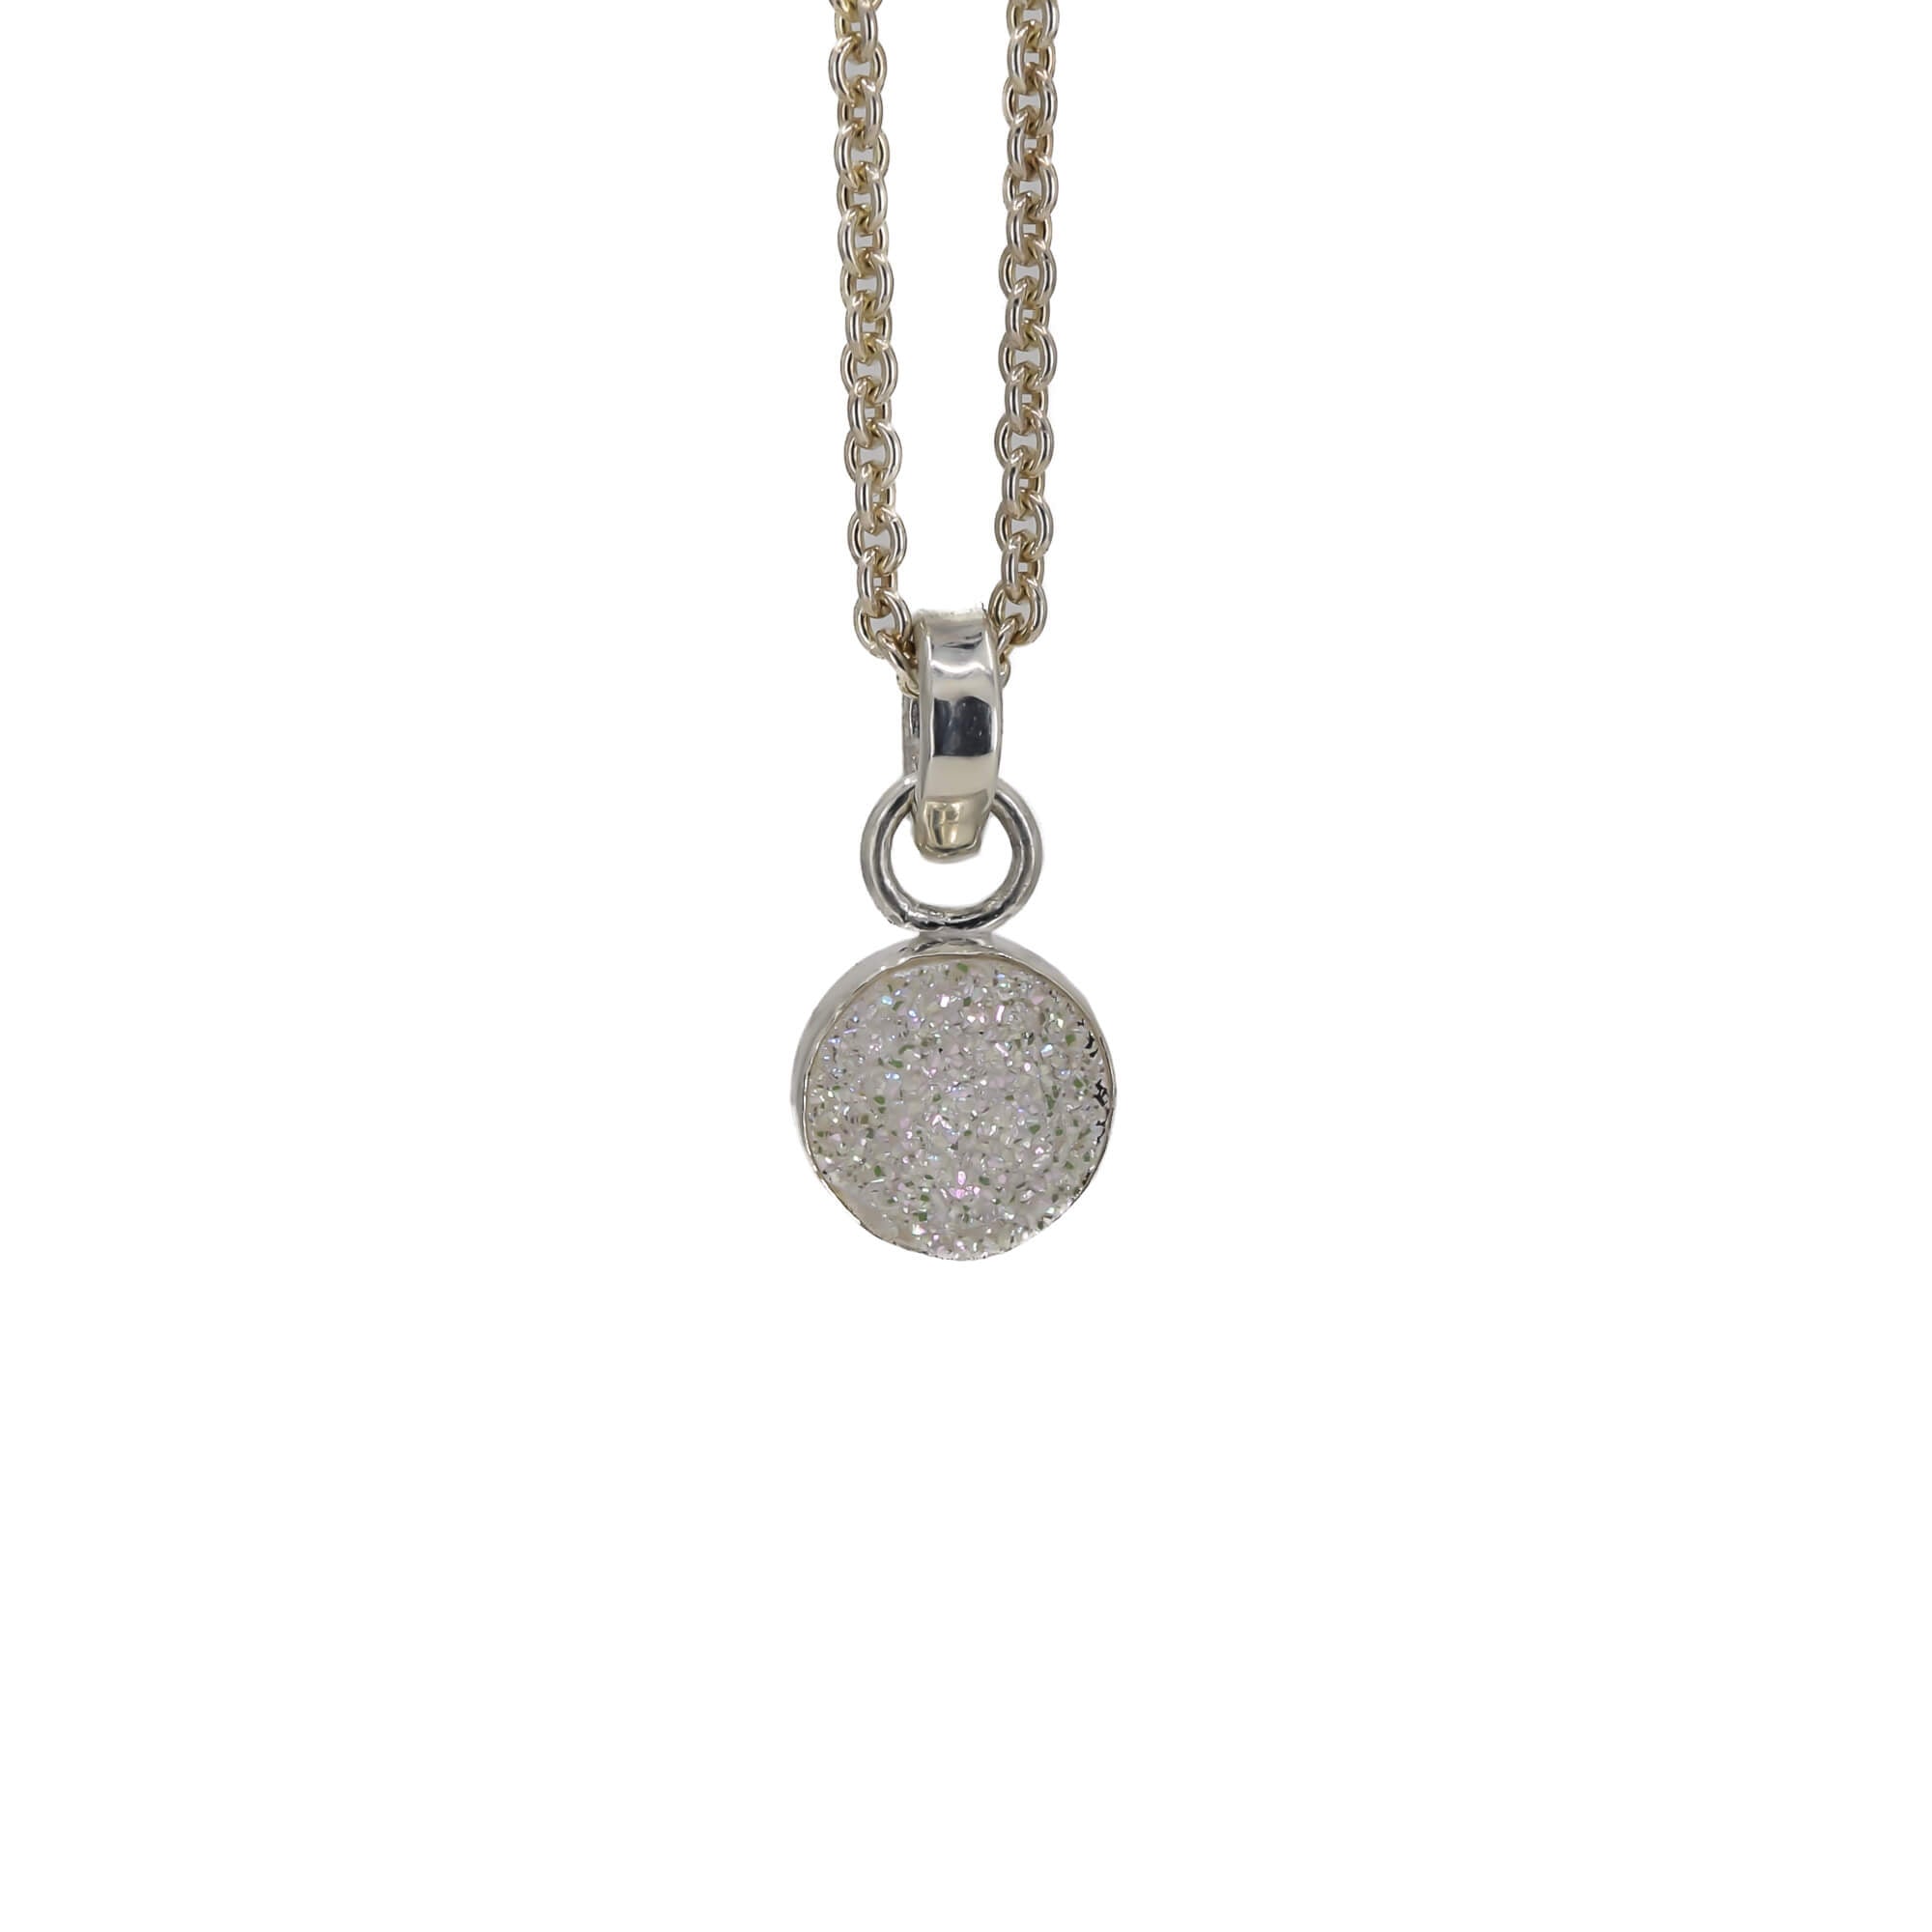 Small white druzy pendant necklace sterling silver 